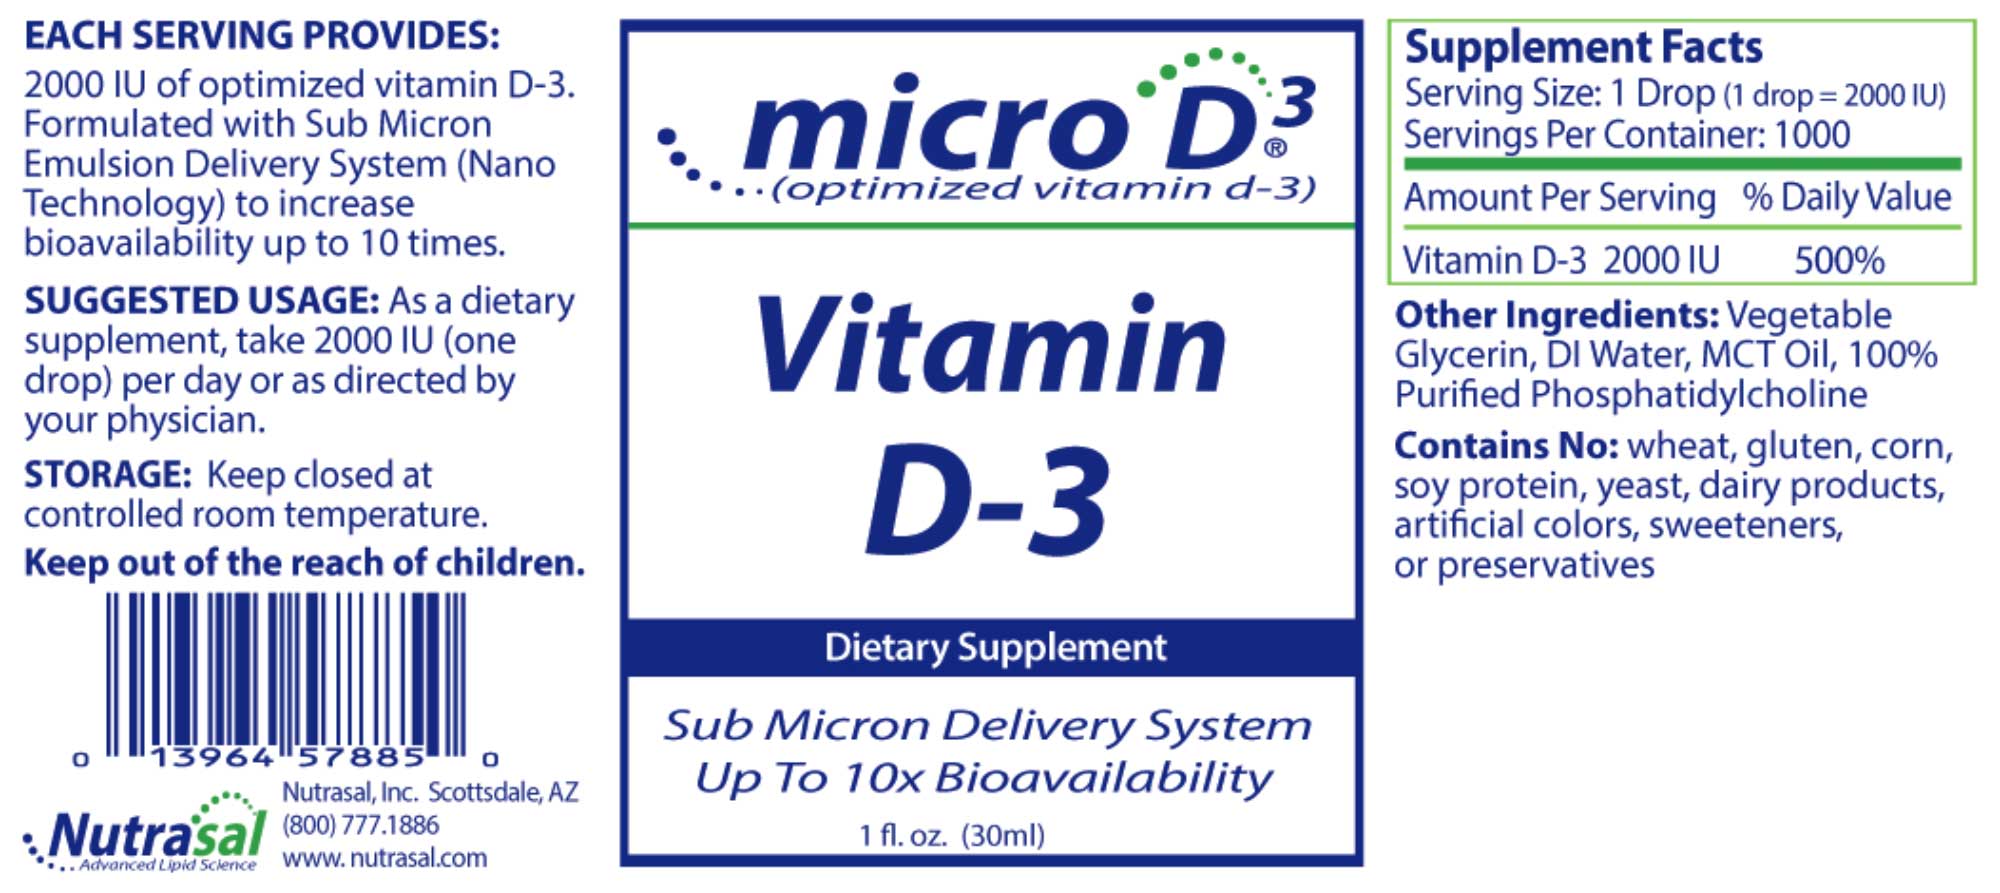 Nutrasal Vitamin D3 with M.E.D.S. (Nano) Technology Ingredients